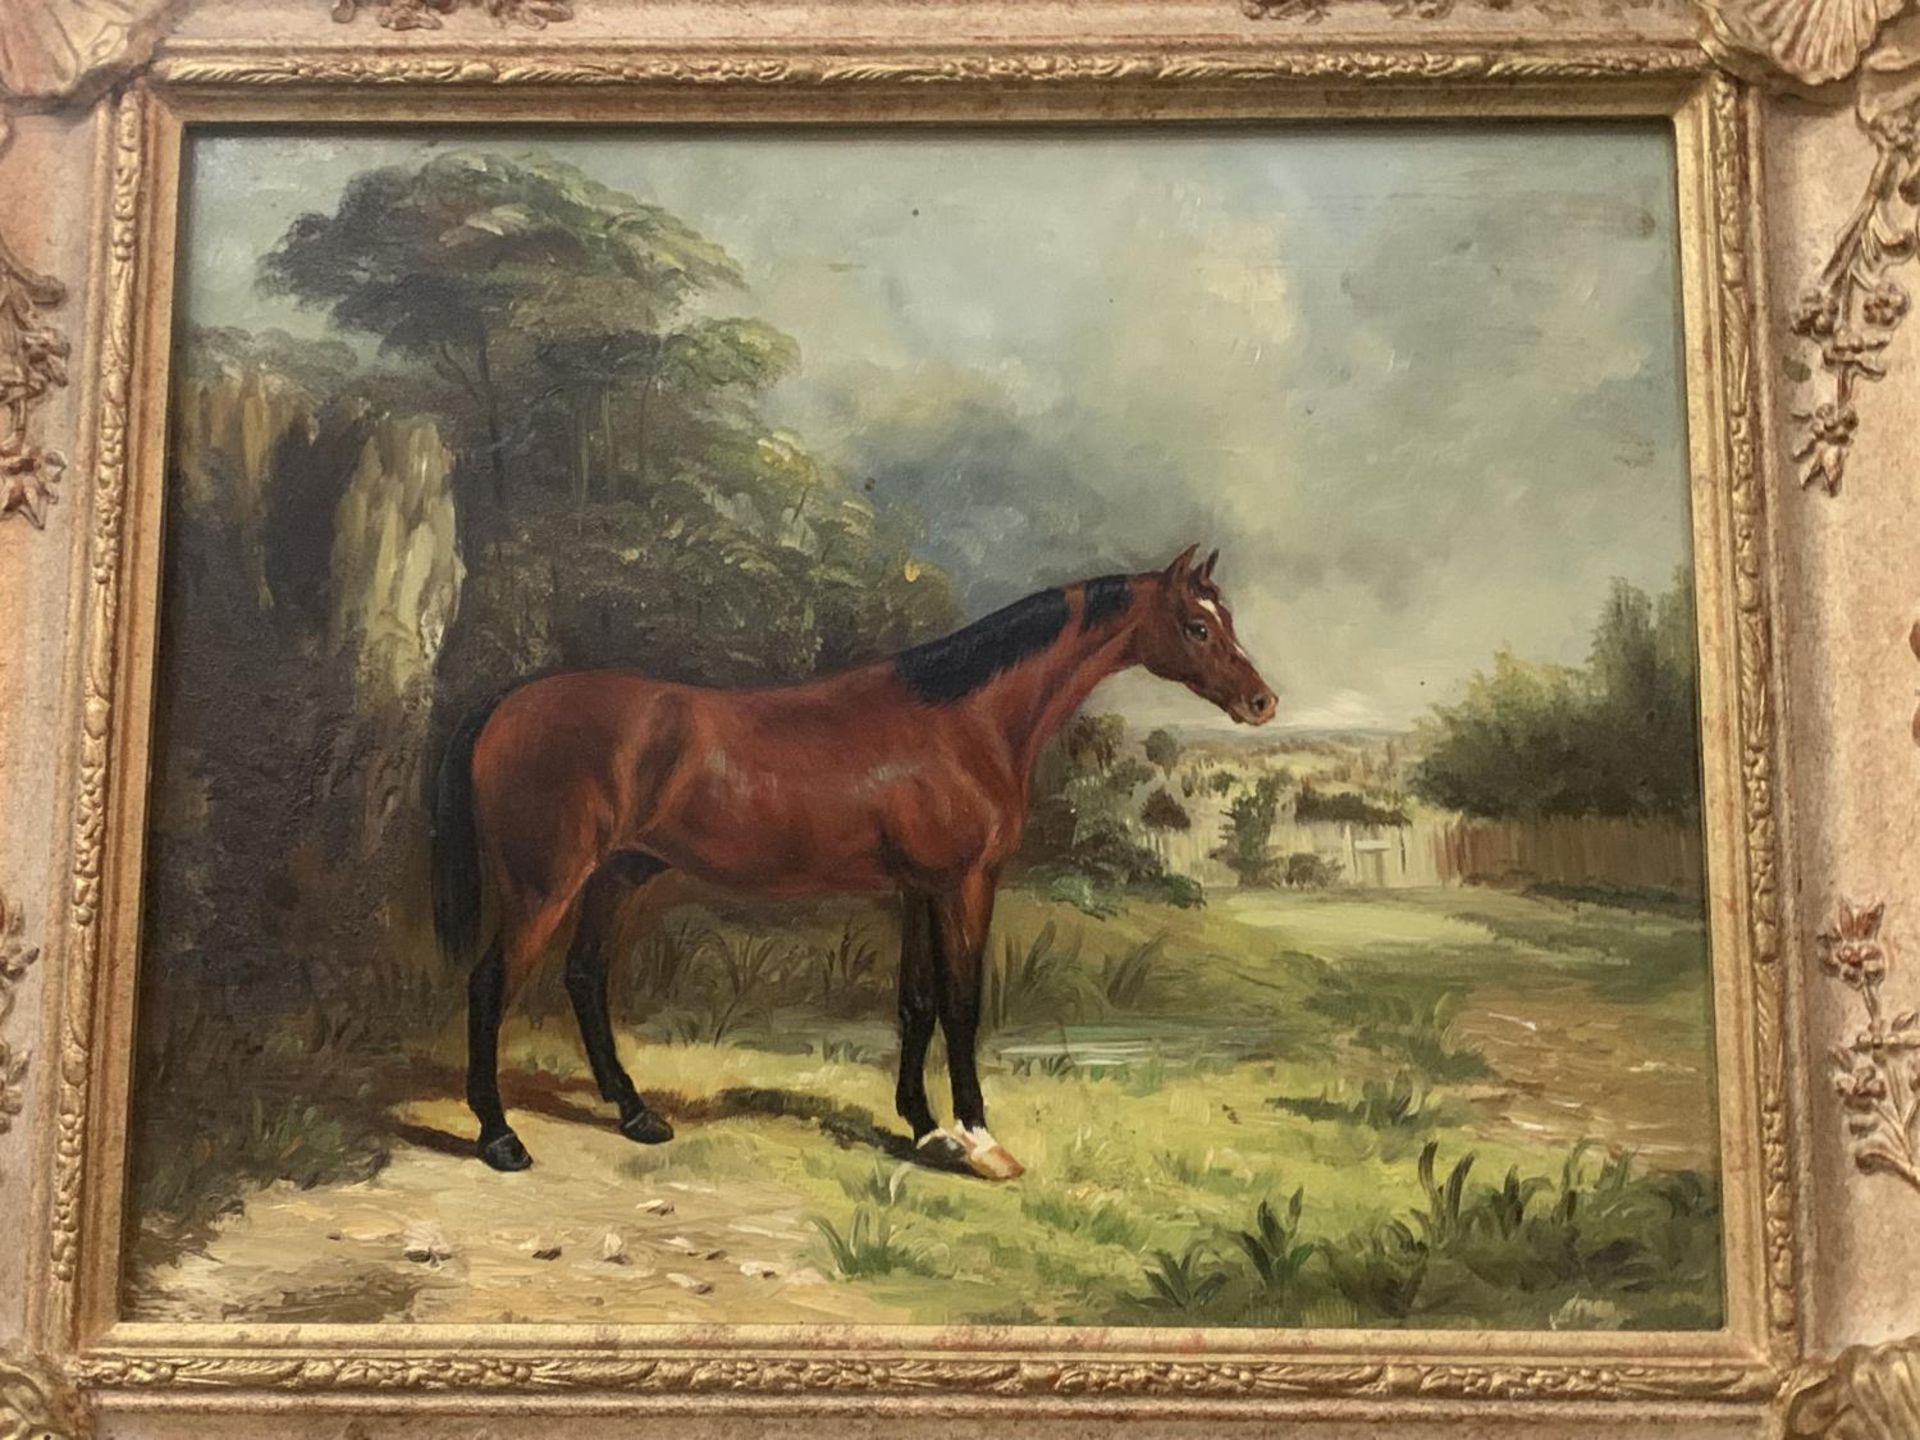 A ORNATE FRAMED POSSIBLY OIL ON BOARD OF A RACE HORSE NIPISIQUIT - Image 2 of 5